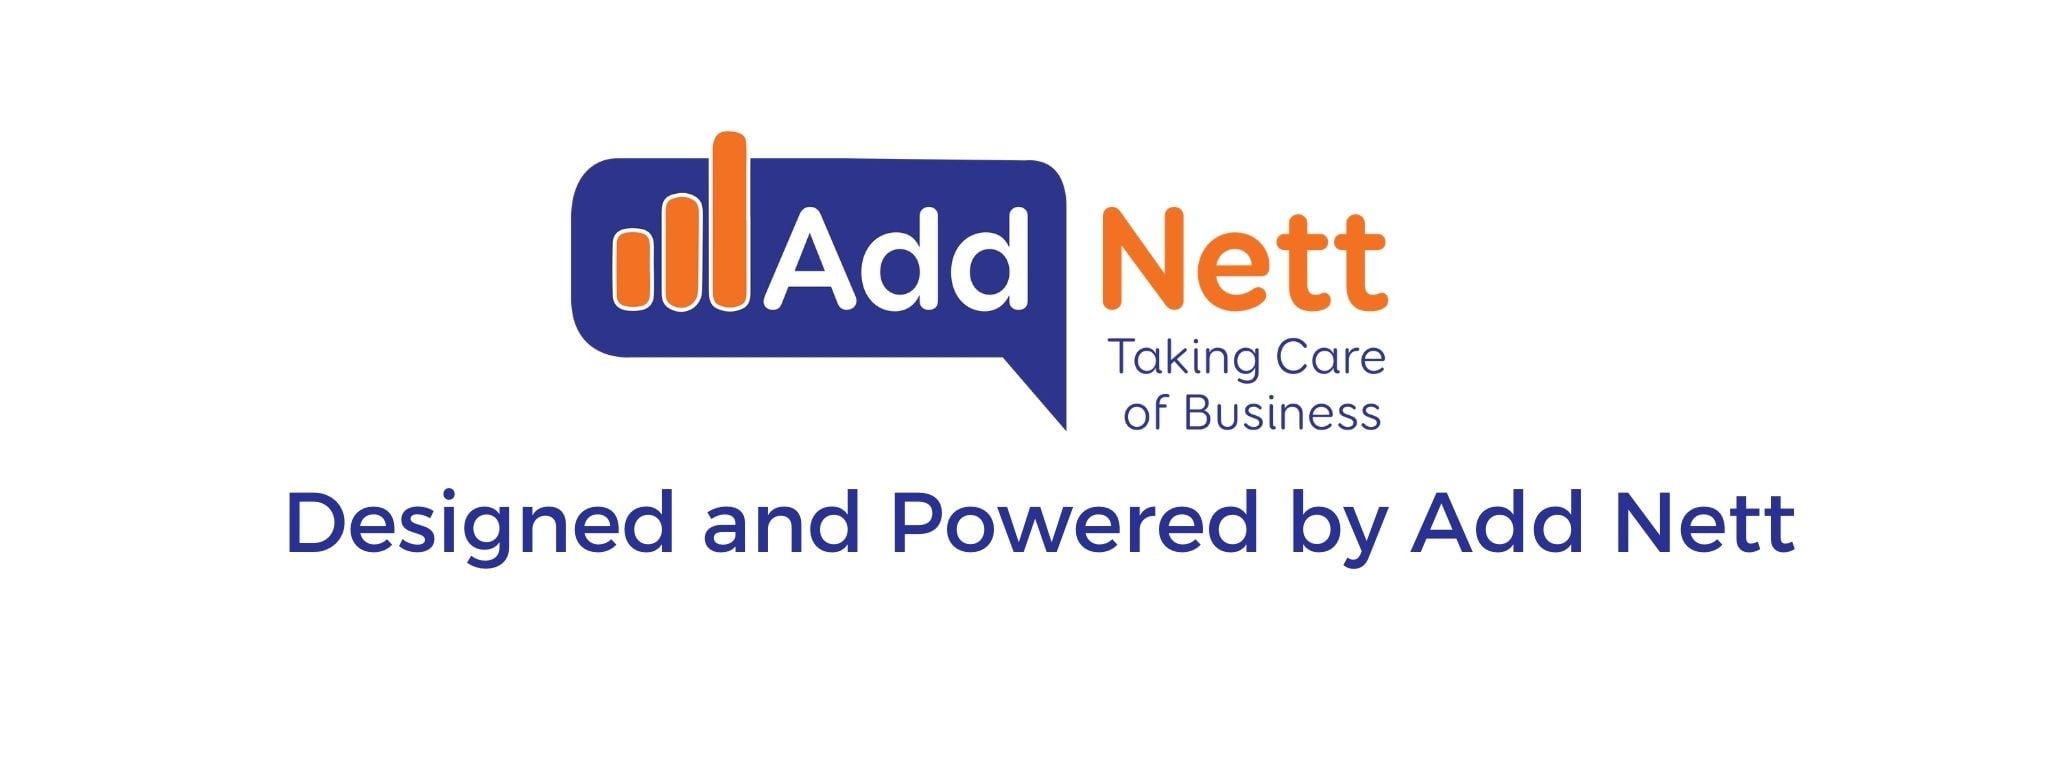 Add Nett Taking Care of Business - Designed and Powered by Add Nett